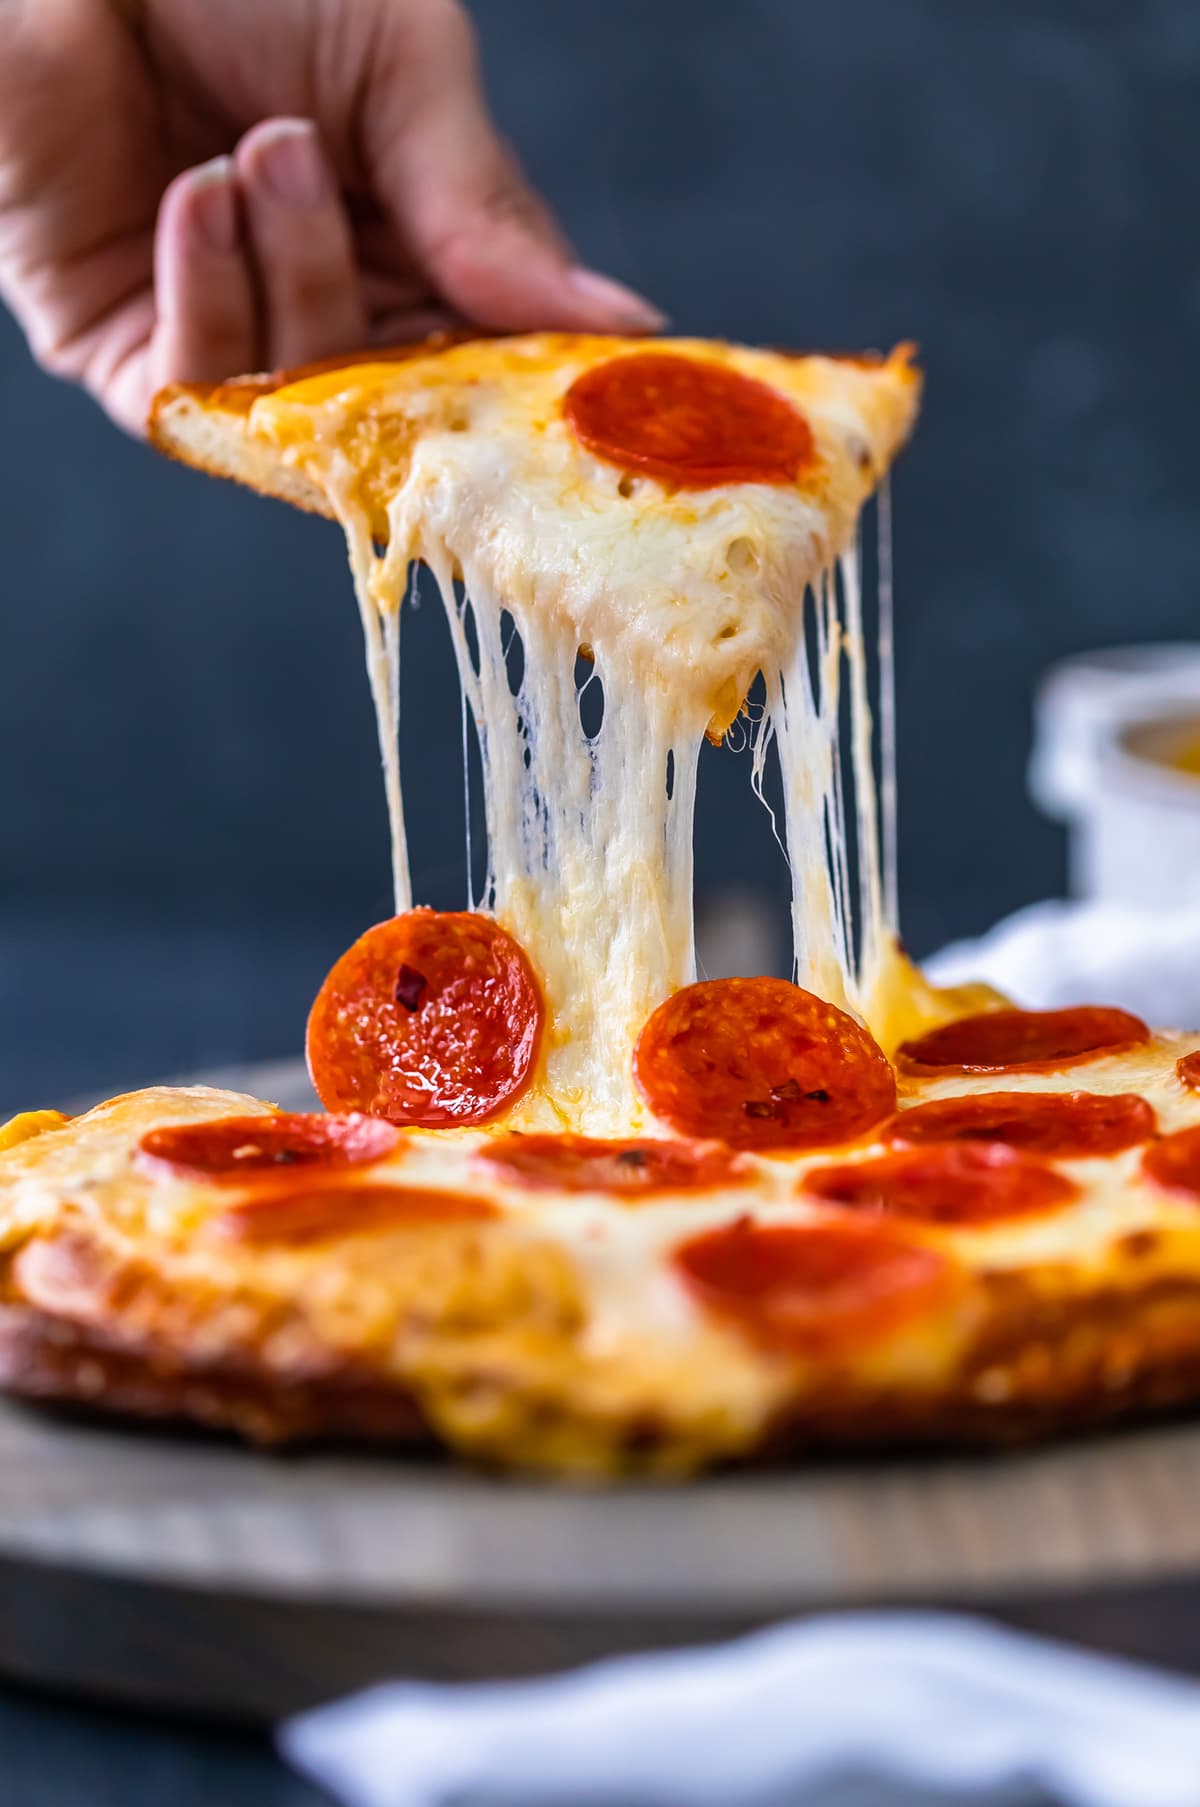 pepperoni pizza cheese pizza